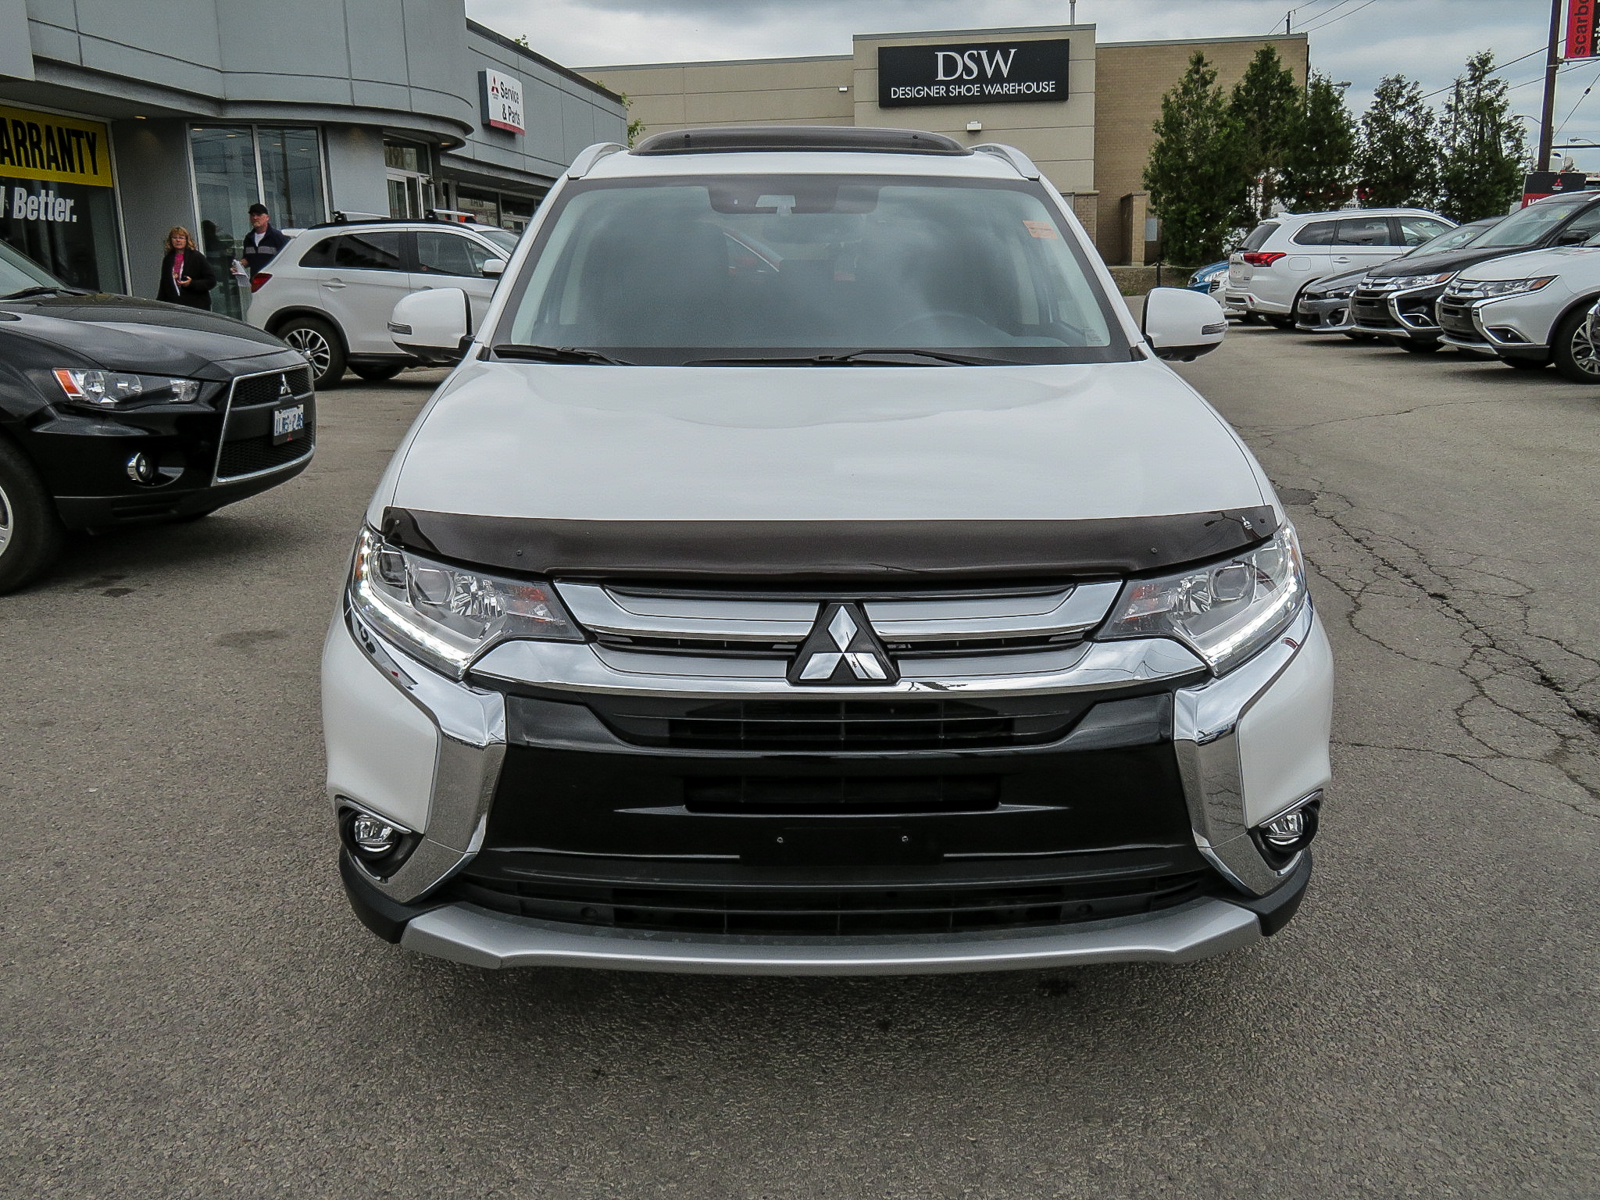 Used 2017 Mitsubishi Outlander in Scarborough,ON